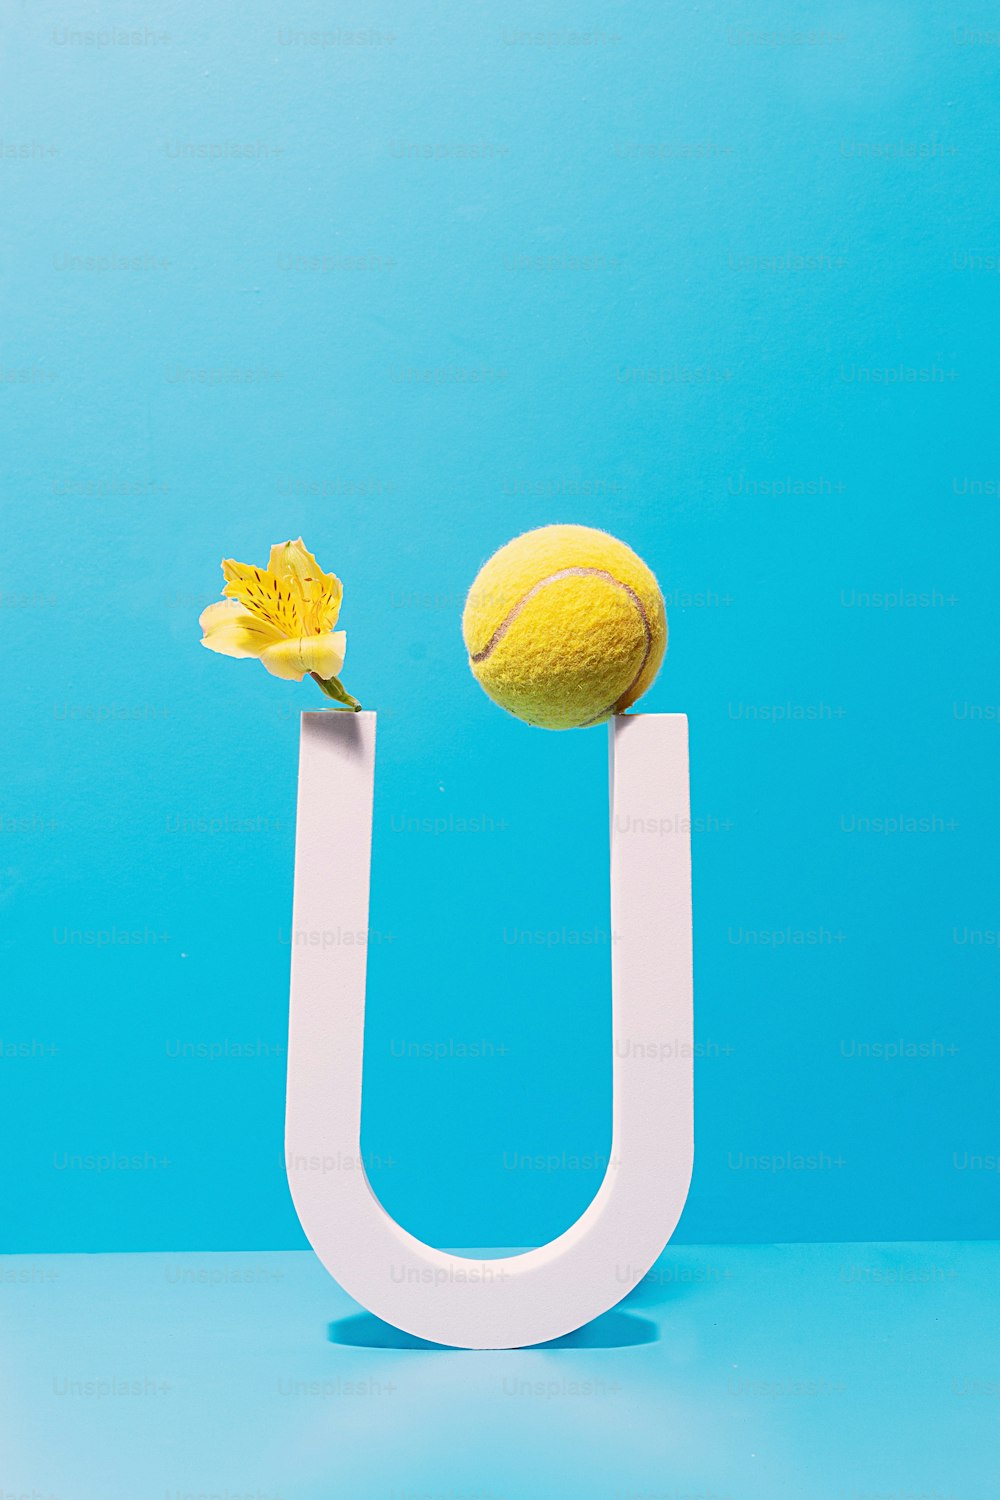 a yellow flower and a tennis ball on a white letter u